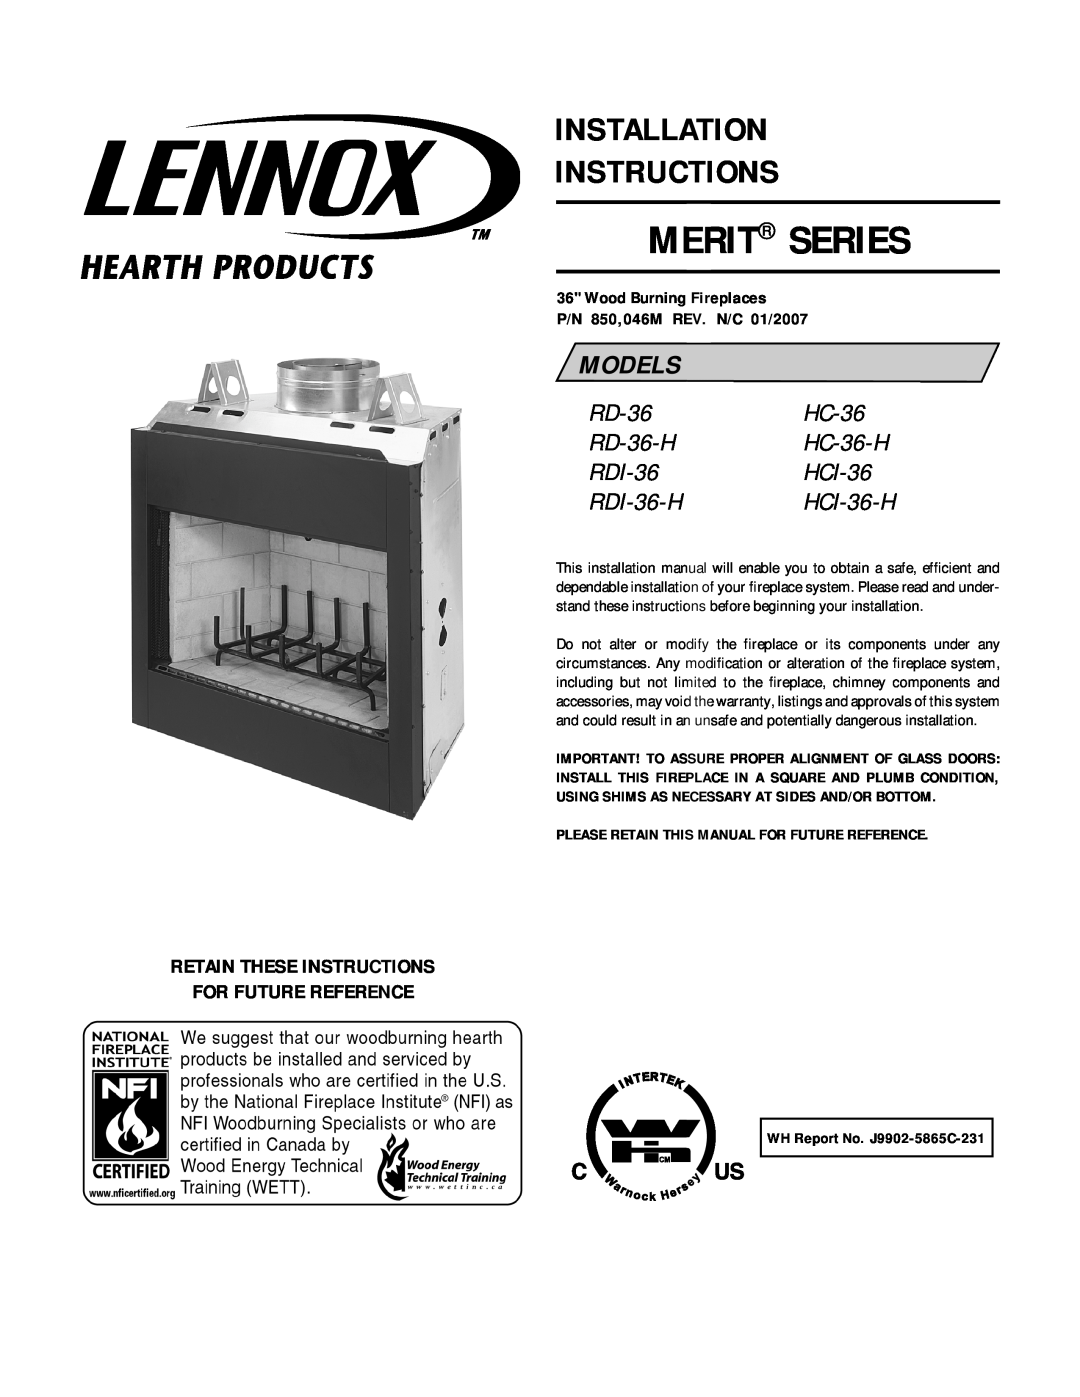 Linksys RDI-36-H HCI-36-H installation instructions Retain These Instructions For Future Reference, Merit Series, Models 